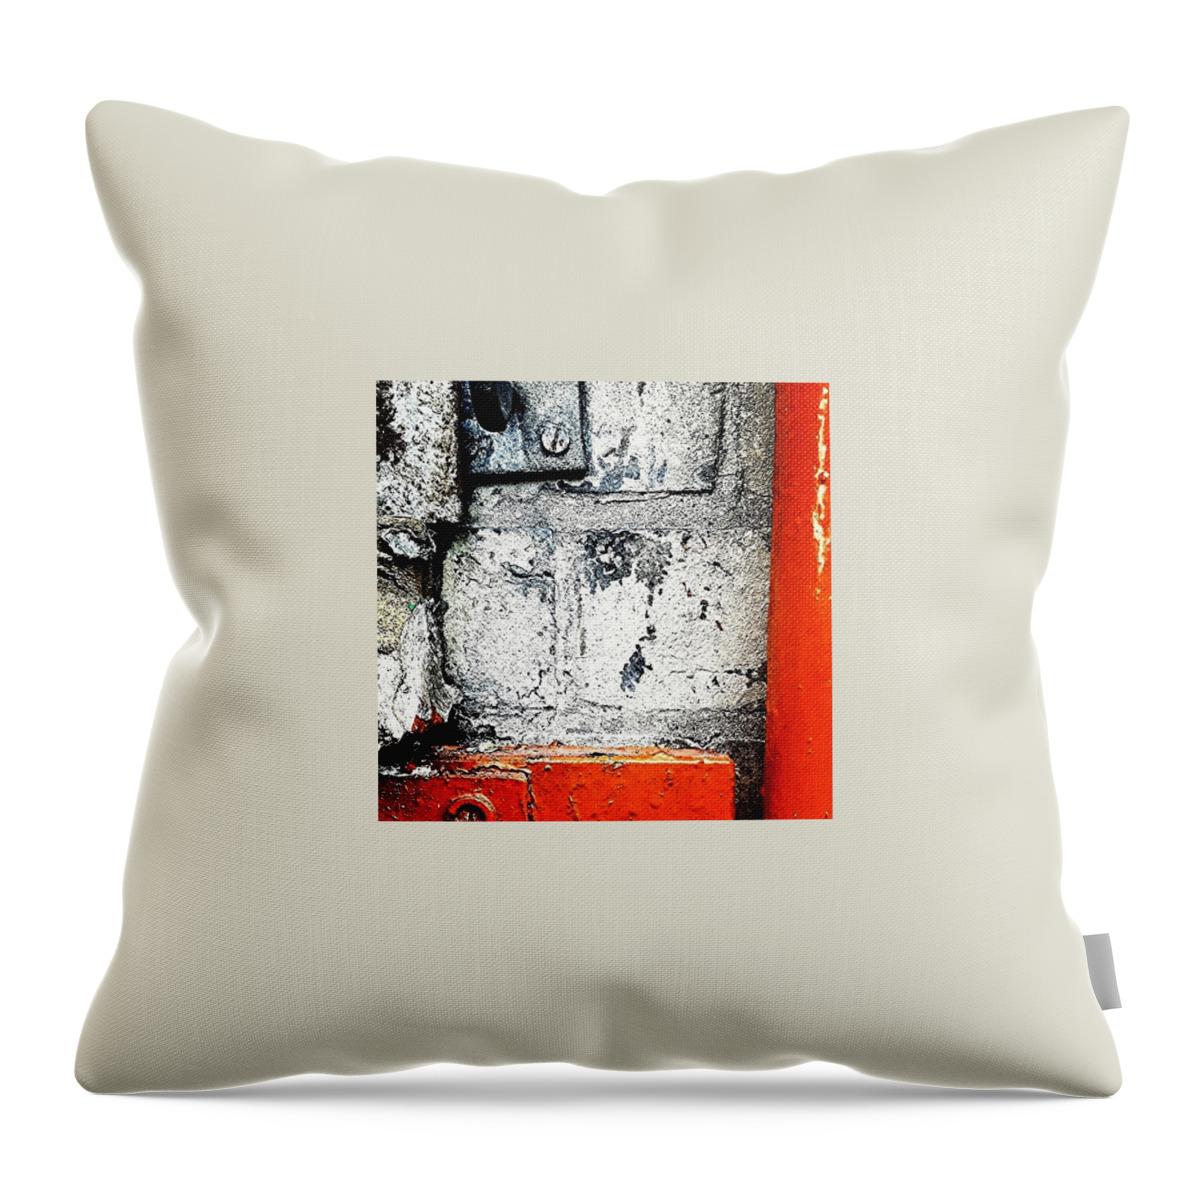 Beautiful Throw Pillow featuring the photograph Urban Wall 3 by Jason Roust